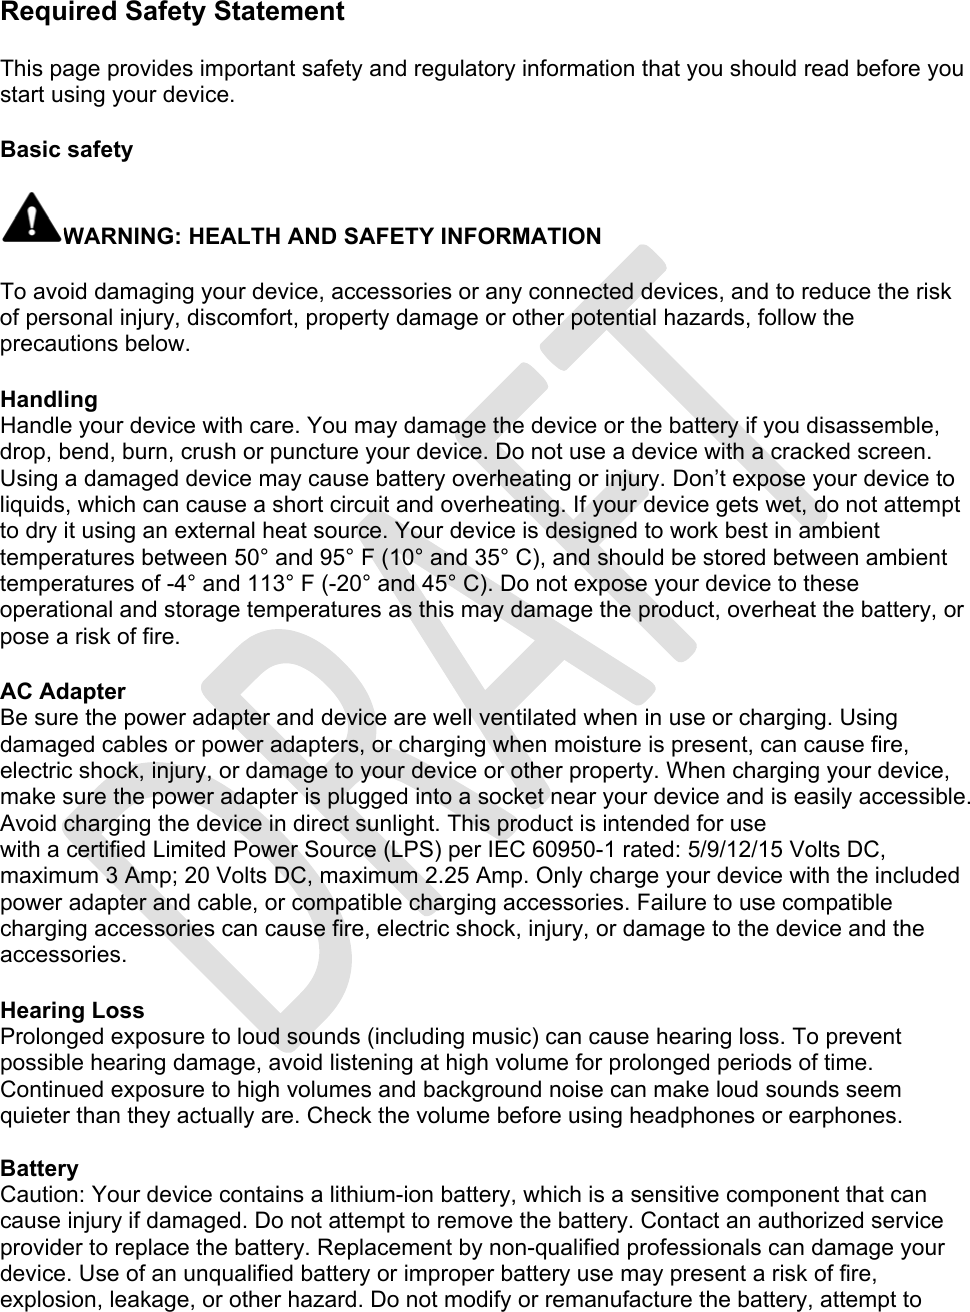 Required Safety Statement  This page provides important safety and regulatory information that you should read before you start using your device.   Basic safety  WARNING: HEALTH AND SAFETY INFORMATION  To avoid damaging your device, accessories or any connected devices, and to reduce the risk of personal injury, discomfort, property damage or other potential hazards, follow the precautions below.  Handling Handle your device with care. You may damage the device or the battery if you disassemble, drop, bend, burn, crush or puncture your device. Do not use a device with a cracked screen. Using a damaged device may cause battery overheating or injury. Don’t expose your device to liquids, which can cause a short circuit and overheating. If your device gets wet, do not attempt to dry it using an external heat source. Your device is designed to work best in ambient temperatures between 50° and 95° F (10° and 35° C), and should be stored between ambient temperatures of -4° and 113° F (-20° and 45° C). Do not expose your device to these operational and storage temperatures as this may damage the product, overheat the battery, or pose a risk of fire.  AC Adapter Be sure the power adapter and device are well ventilated when in use or charging. Using damaged cables or power adapters, or charging when moisture is present, can cause fire, electric shock, injury, or damage to your device or other property. When charging your device, make sure the power adapter is plugged into a socket near your device and is easily accessible. Avoid charging the device in direct sunlight. This product is intended for use with a certified Limited Power Source (LPS) per IEC 60950-1 rated: 5/9/12/15 Volts DC, maximum 3 Amp; 20 Volts DC, maximum 2.25 Amp. Only charge your device with the included power adapter and cable, or compatible charging accessories. Failure to use compatible charging accessories can cause fire, electric shock, injury, or damage to the device and the accessories.  Hearing Loss Prolonged exposure to loud sounds (including music) can cause hearing loss. To prevent possible hearing damage, avoid listening at high volume for prolonged periods of time. Continued exposure to high volumes and background noise can make loud sounds seem quieter than they actually are. Check the volume before using headphones or earphones.  Battery Caution: Your device contains a lithium-ion battery, which is a sensitive component that can cause injury if damaged. Do not attempt to remove the battery. Contact an authorized service provider to replace the battery. Replacement by non-qualified professionals can damage your device. Use of an unqualified battery or improper battery use may present a risk of fire, explosion, leakage, or other hazard. Do not modify or remanufacture the battery, attempt to 